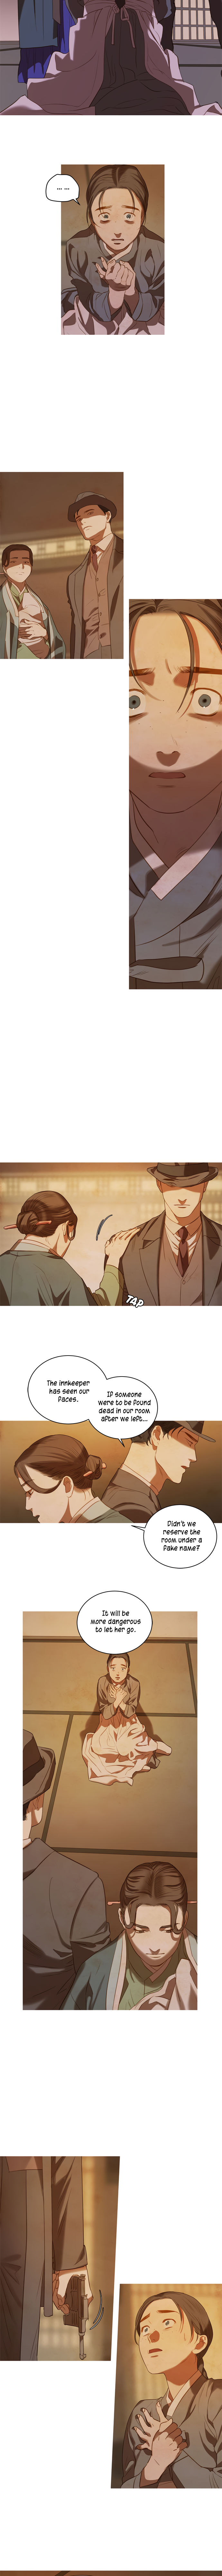 Gorae Byul - The Gyeongseong Mermaid - Chapter 7 Page 12